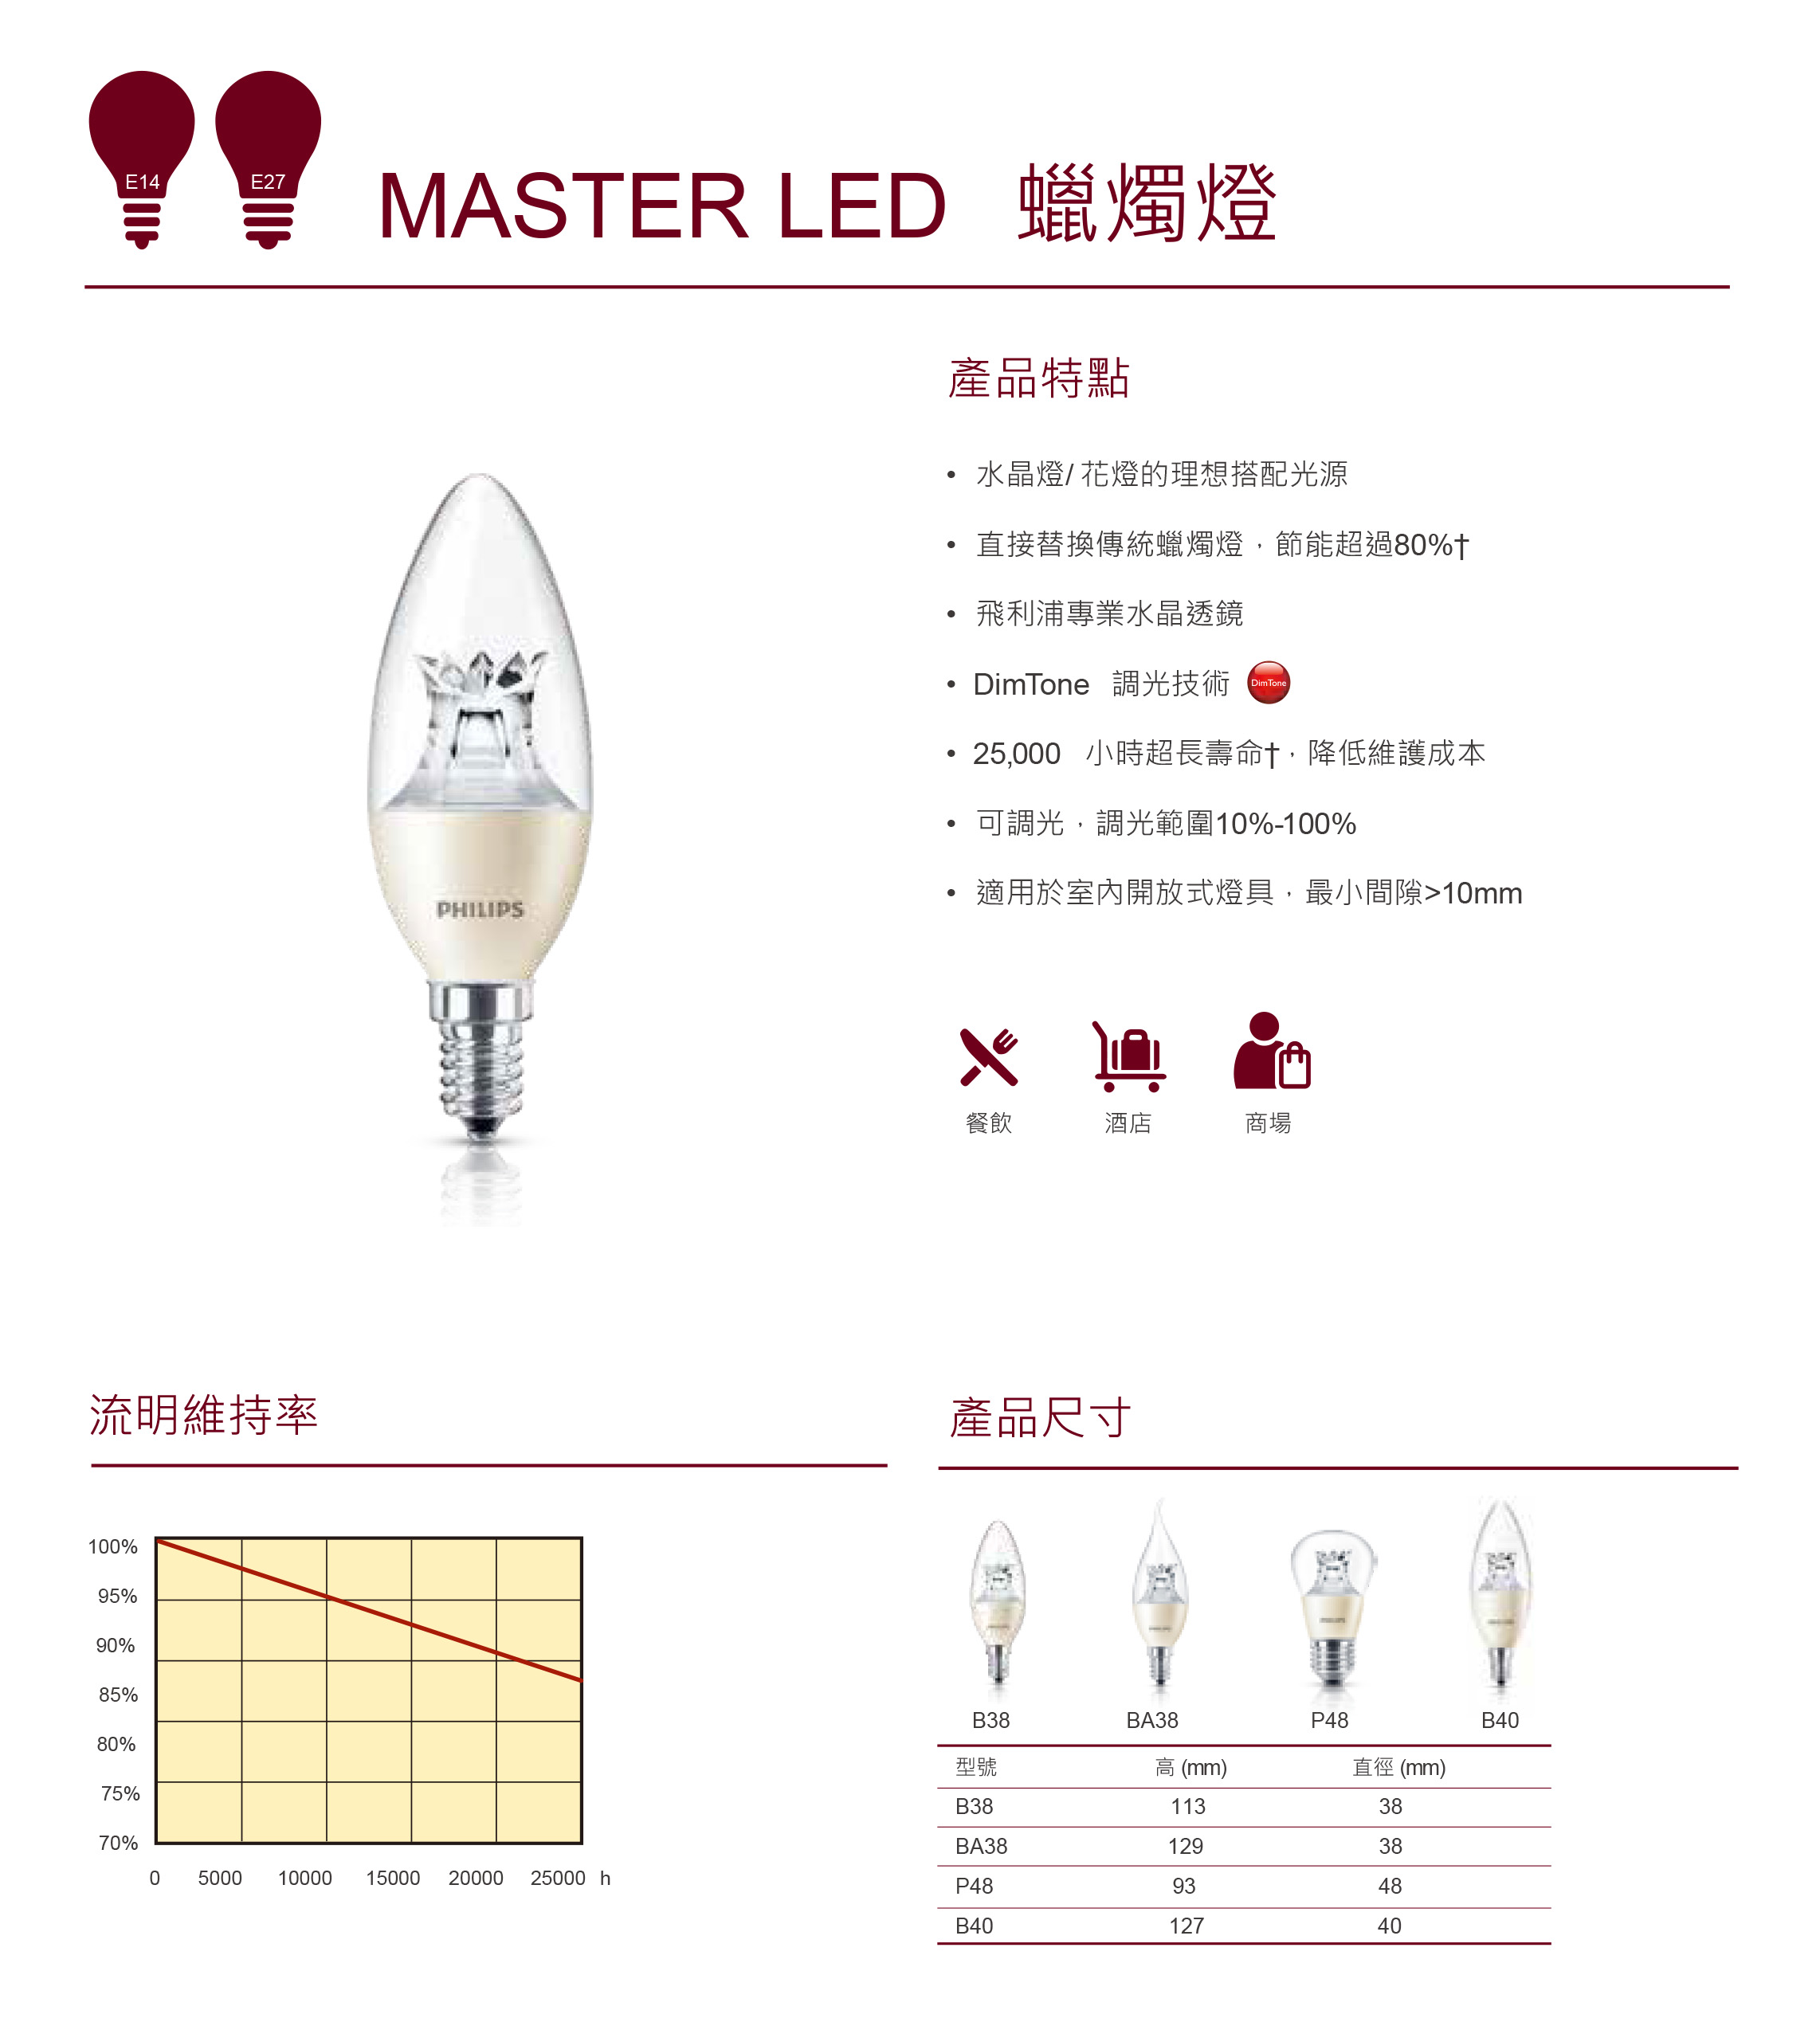 lighting philips MASTER LED candle 蠟燭燈